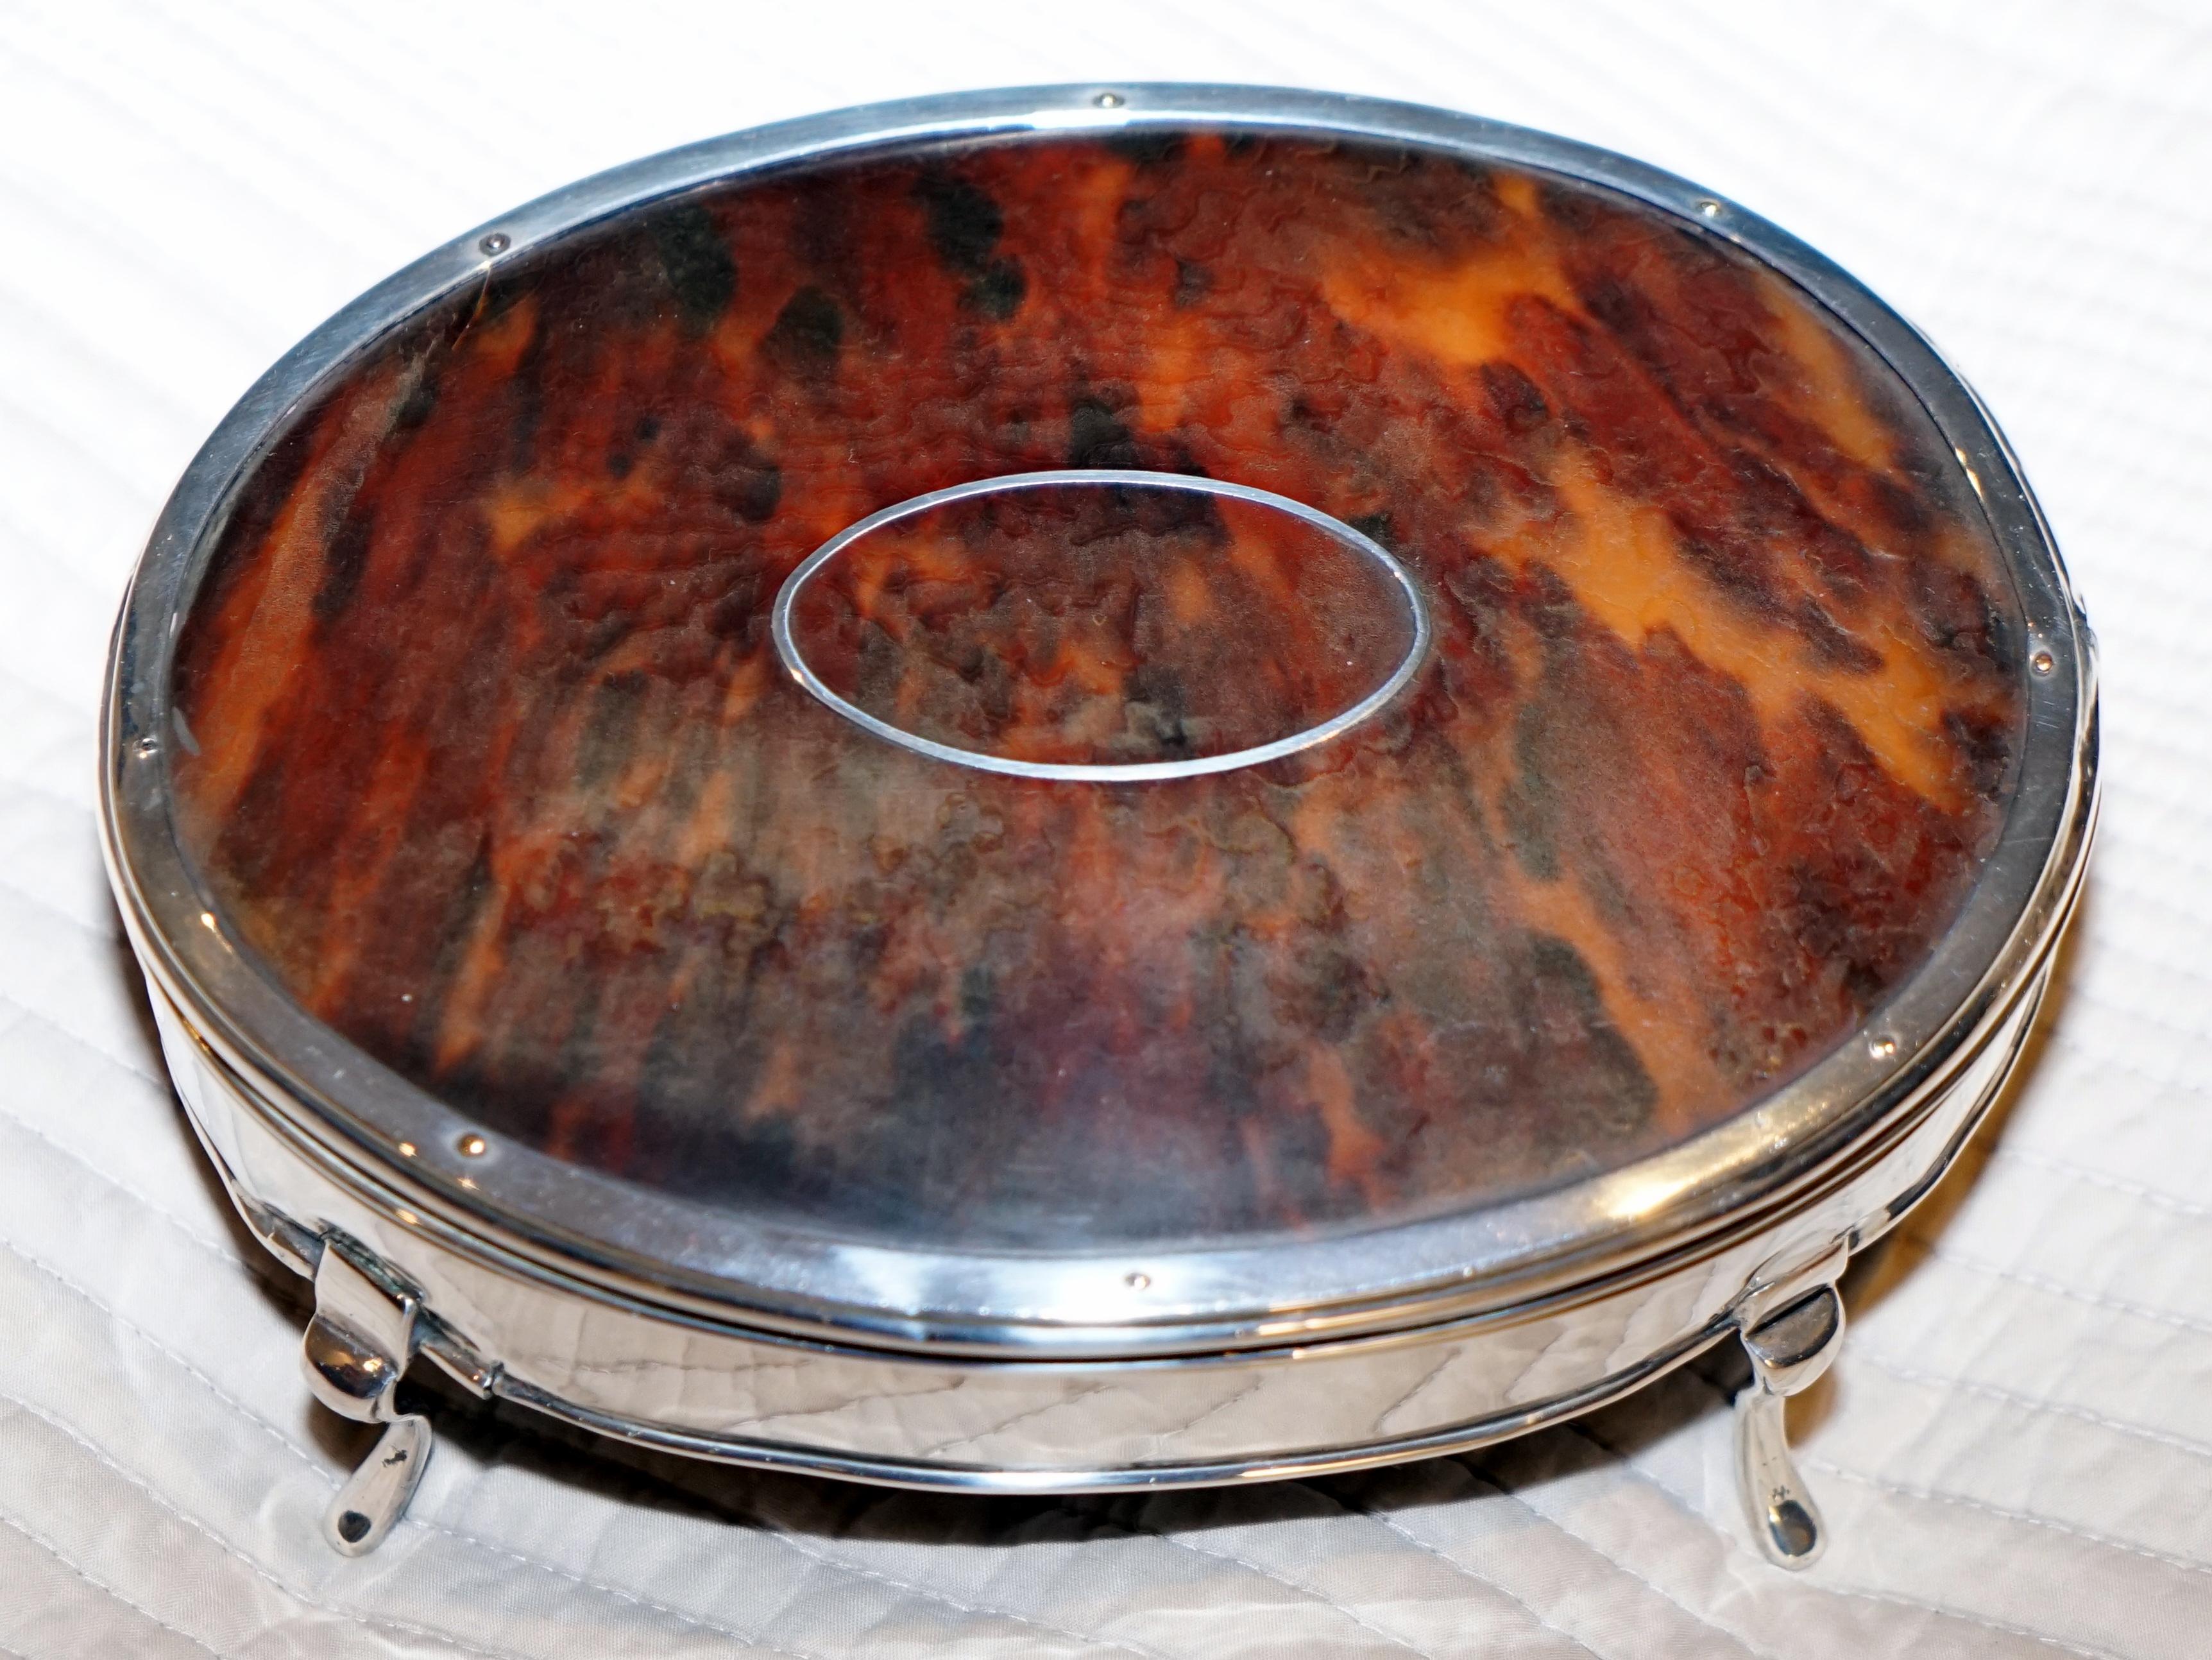 We are delighted to offer for sale this stunning original Asprey London 1917 solid sterling silver Jewellery box with a faux tortoiseshell top made by the amazing Charles and Richard Comyns

A fantastic looking elegant and well made jewellery box,